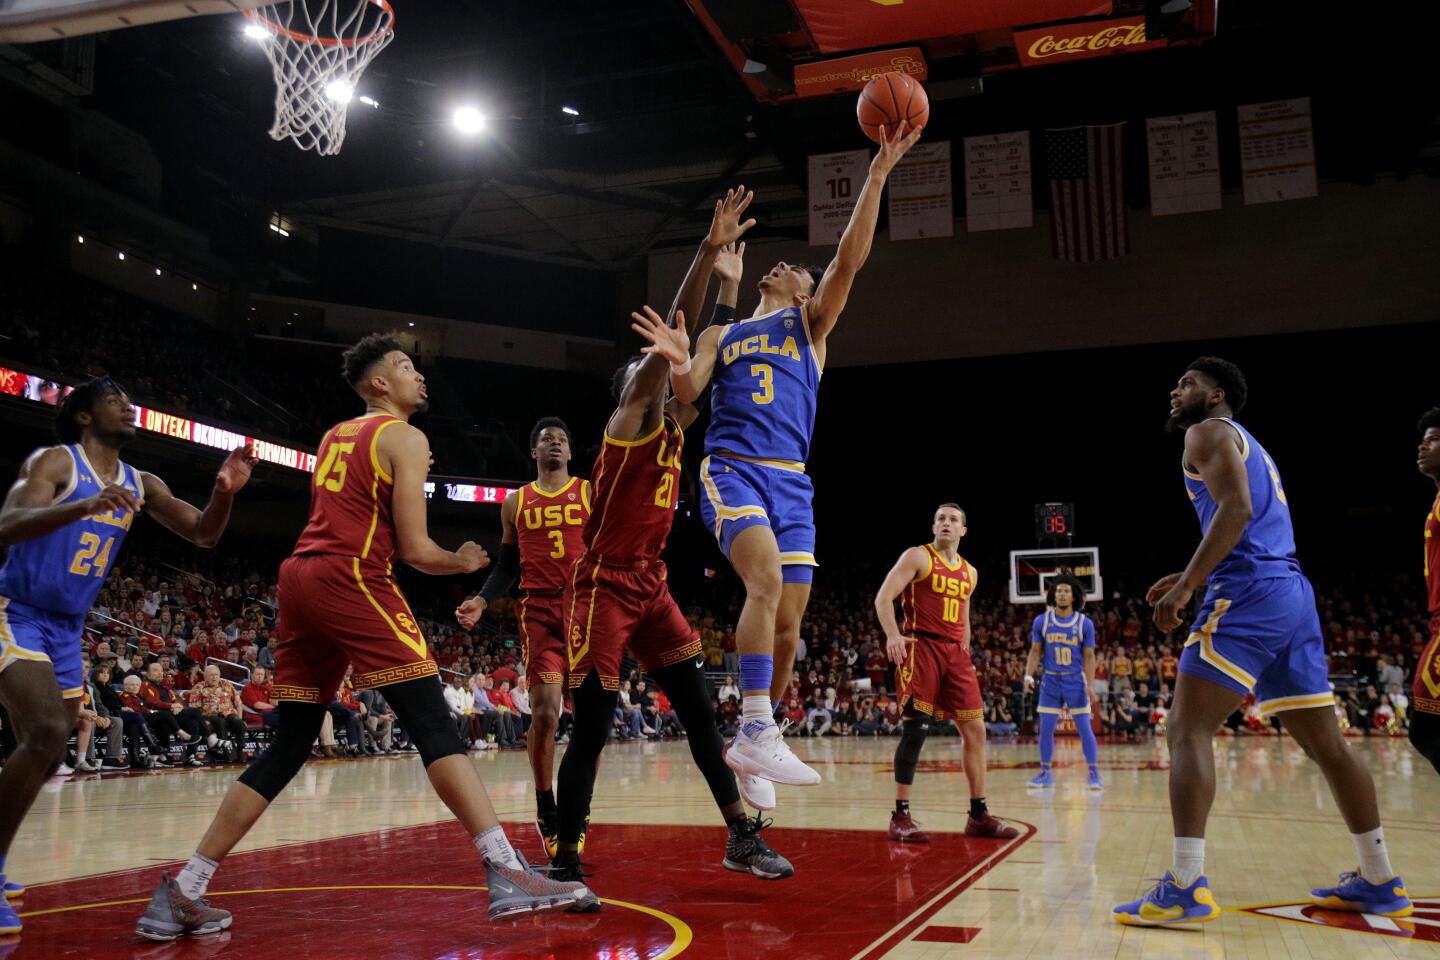 UCLA guard Jules Bernard drives to the basket during the first half of the Trojans' 54-52 victory over the Bruins at Galen Center on March 7, 2020.